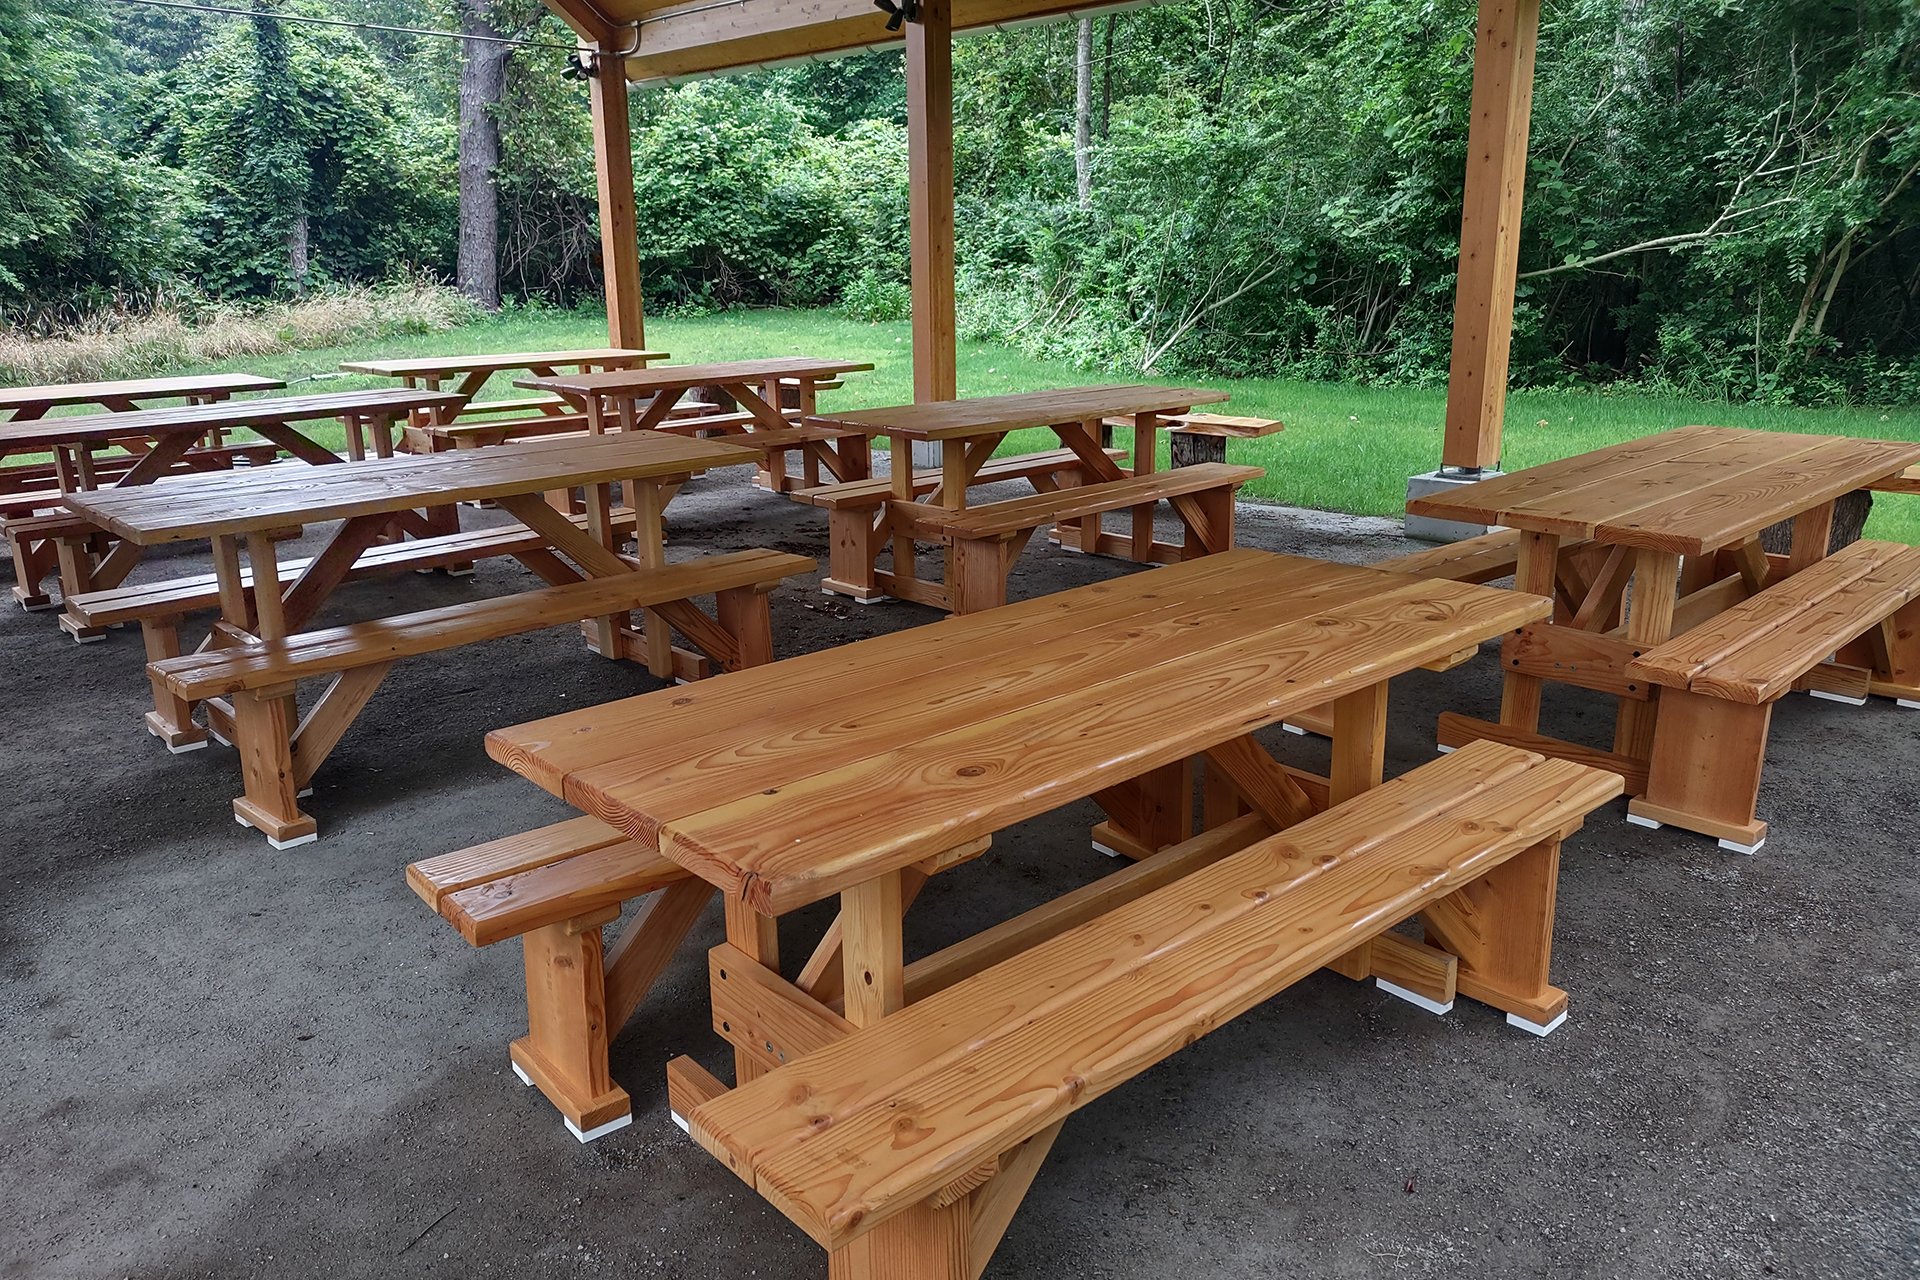 Newly installed picnic tables under an awning